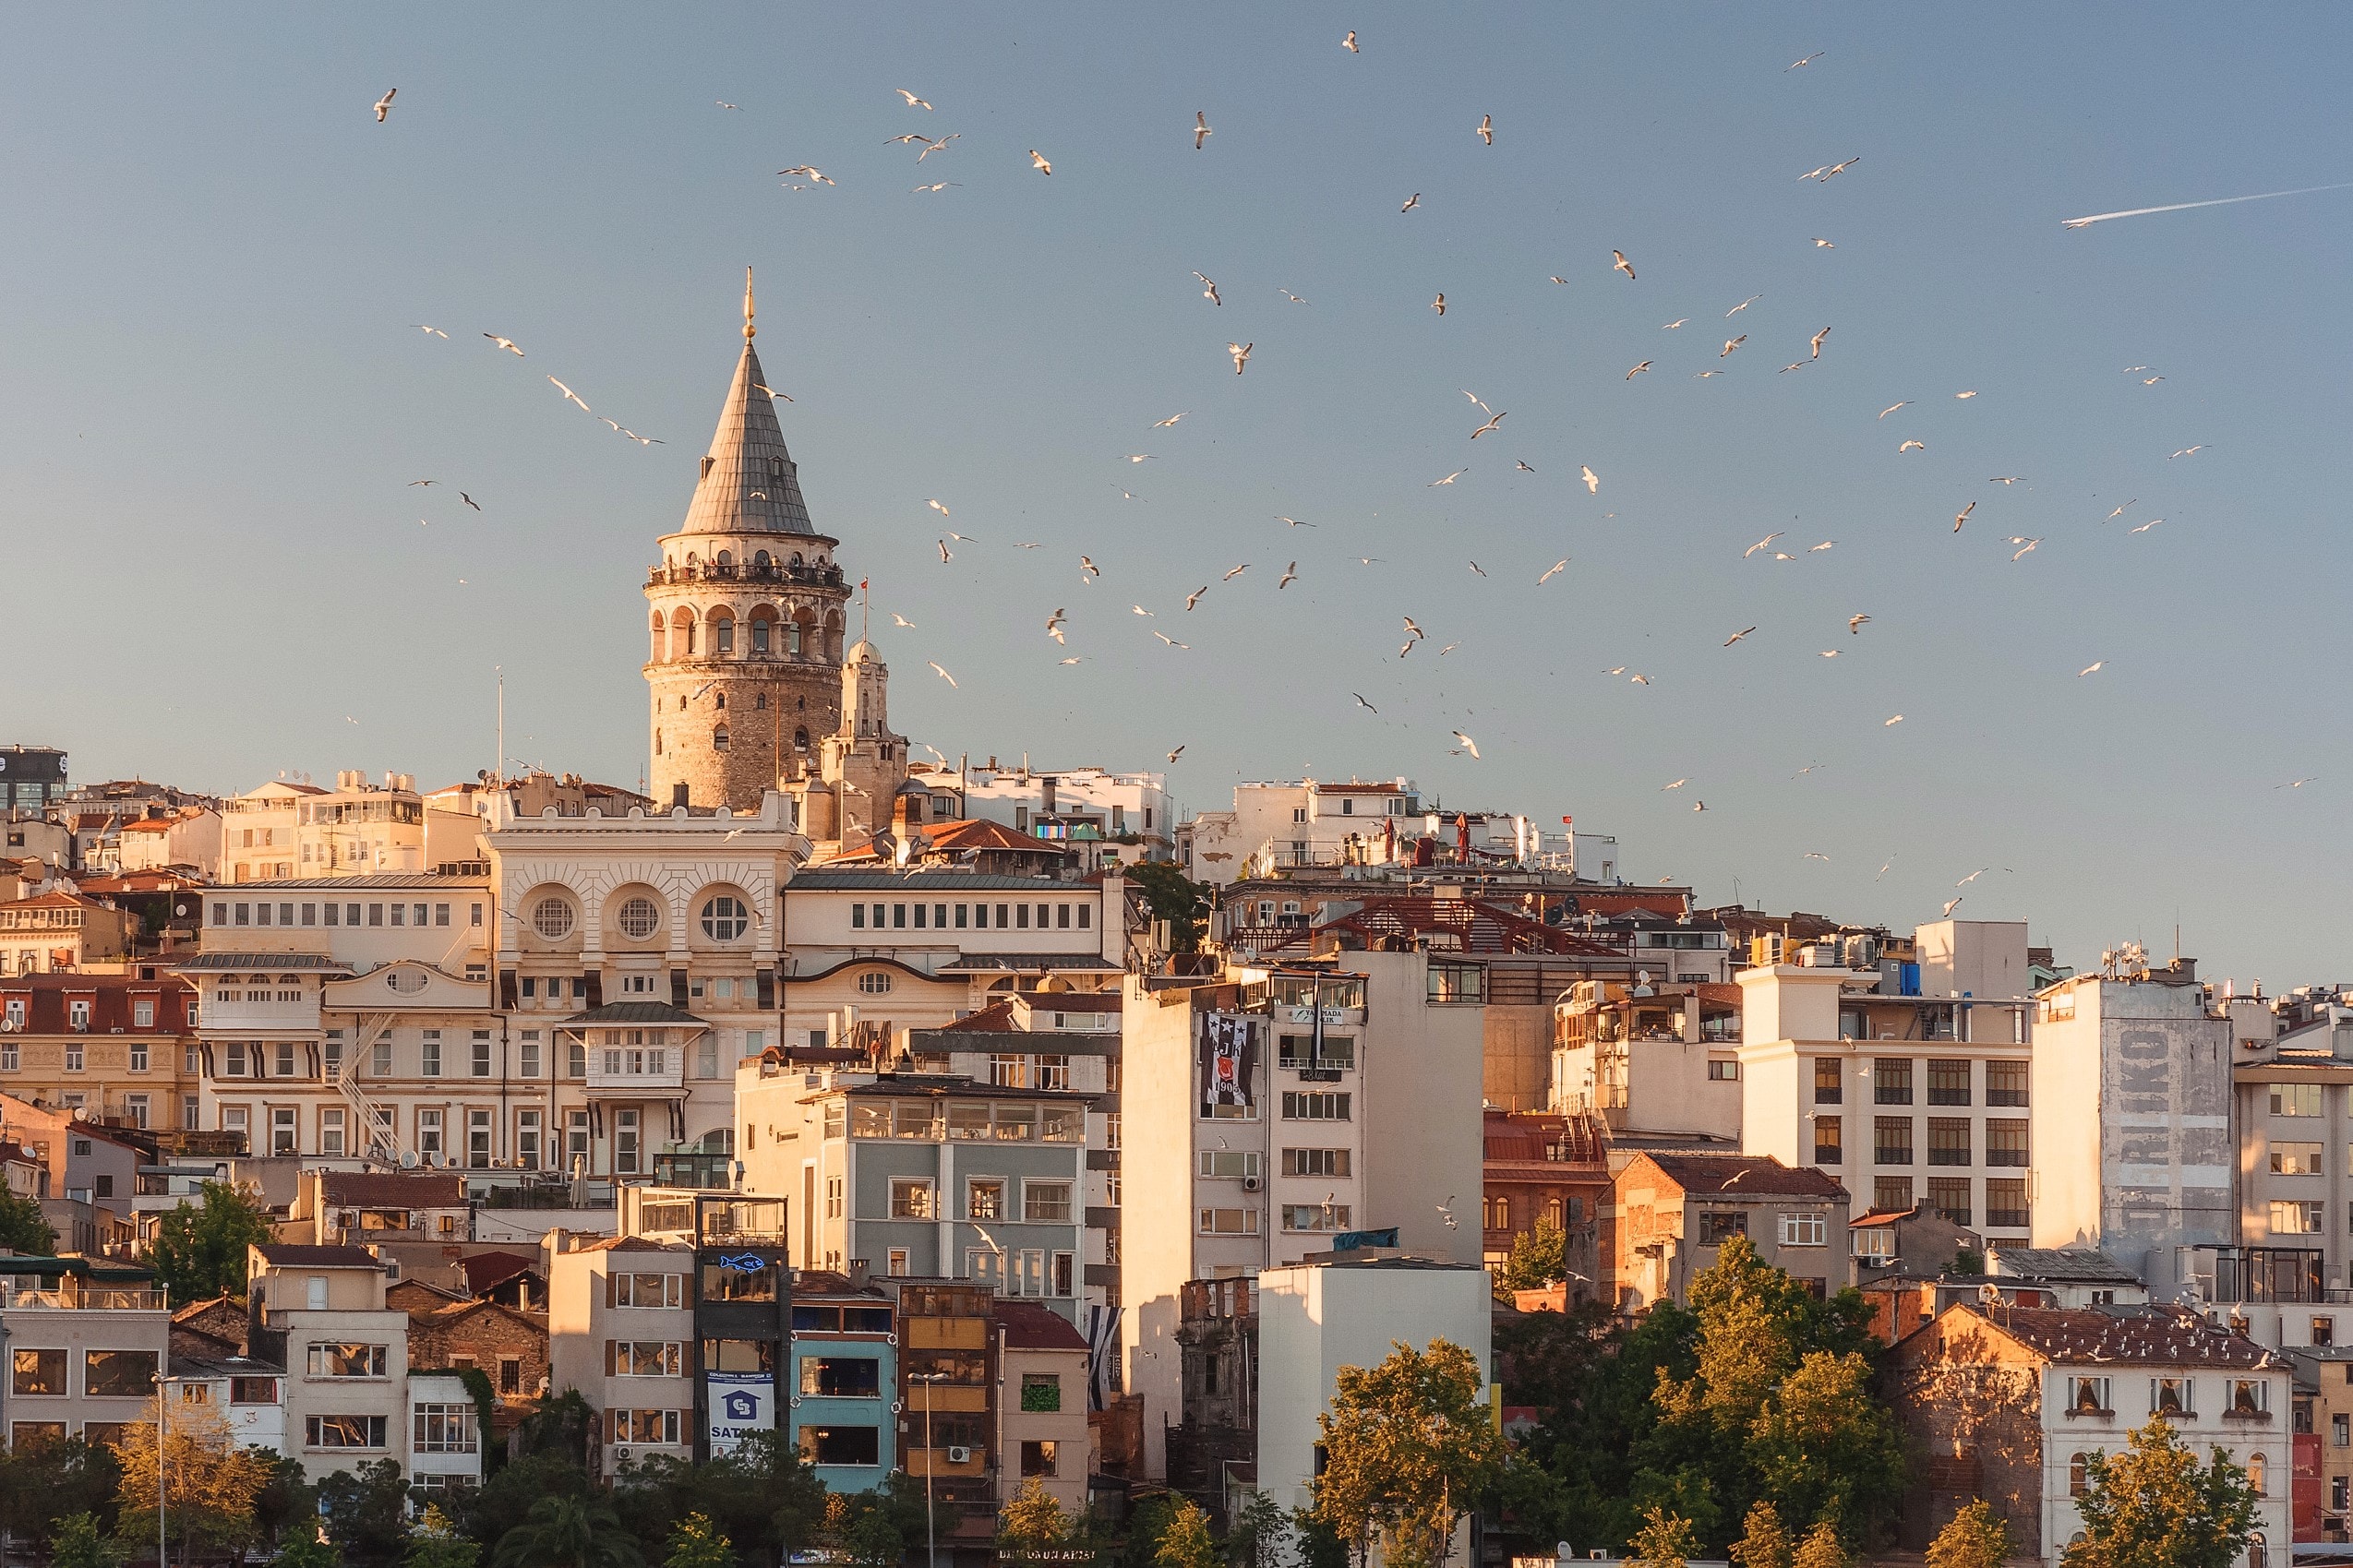 Galata, Istanbul - 15 Best Destinations in the World